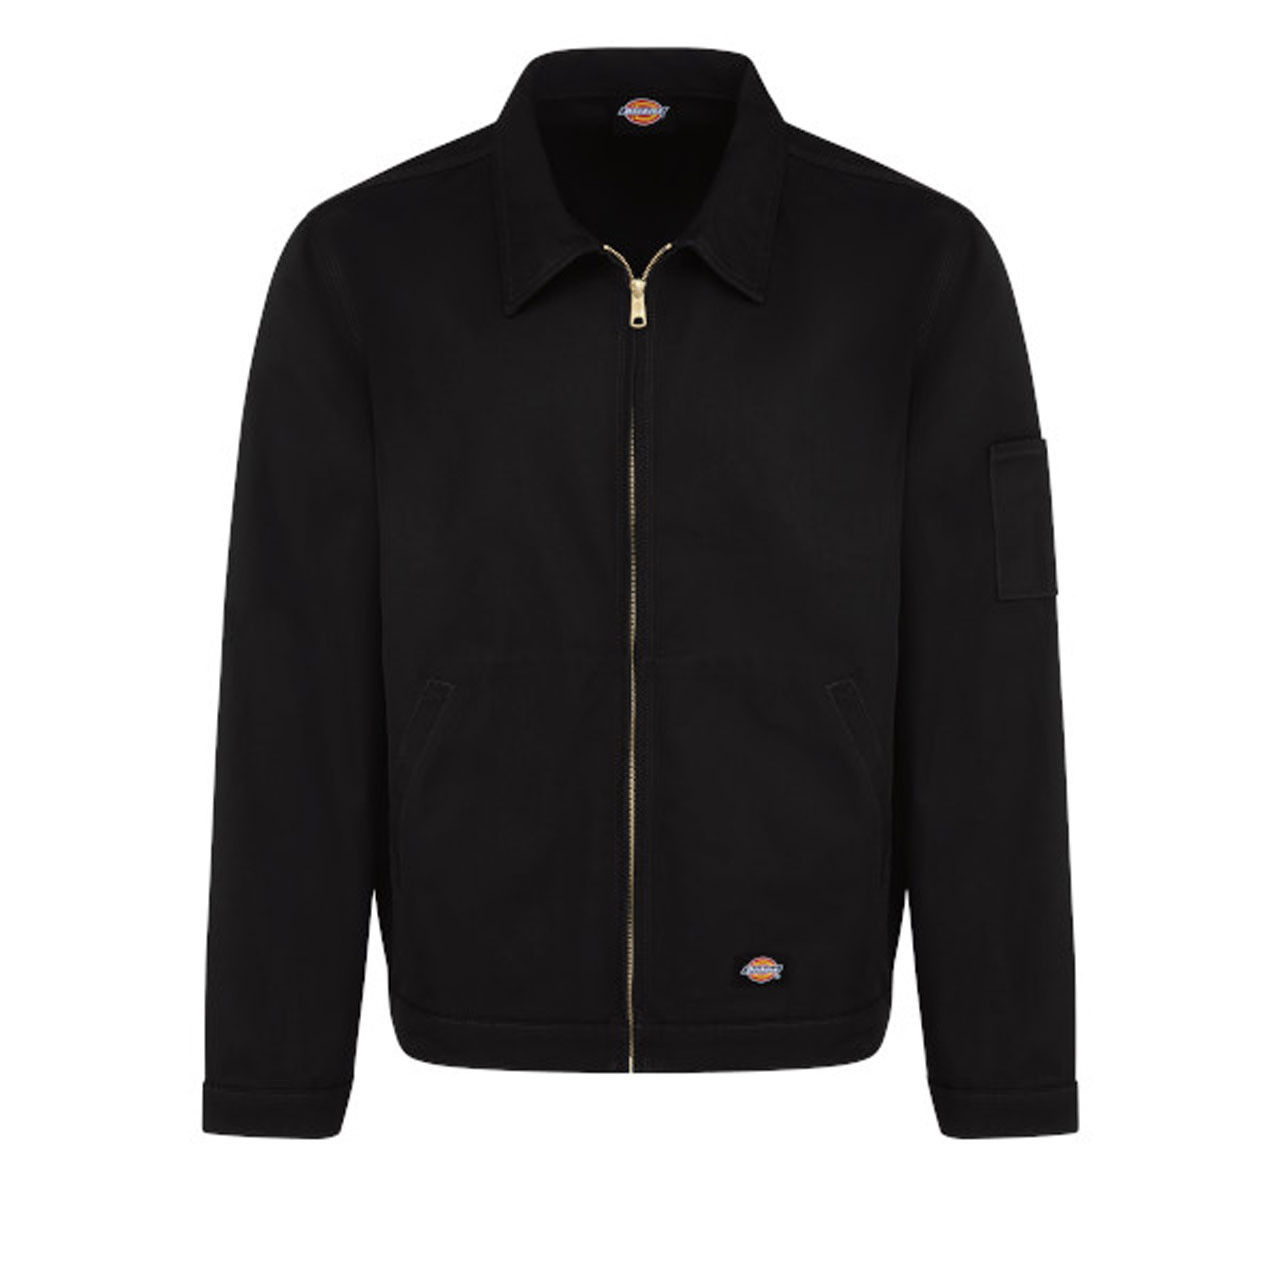 Is the Dickies Unlined Industrial Eisenhower Jacket resistant to wrinkles and stains?